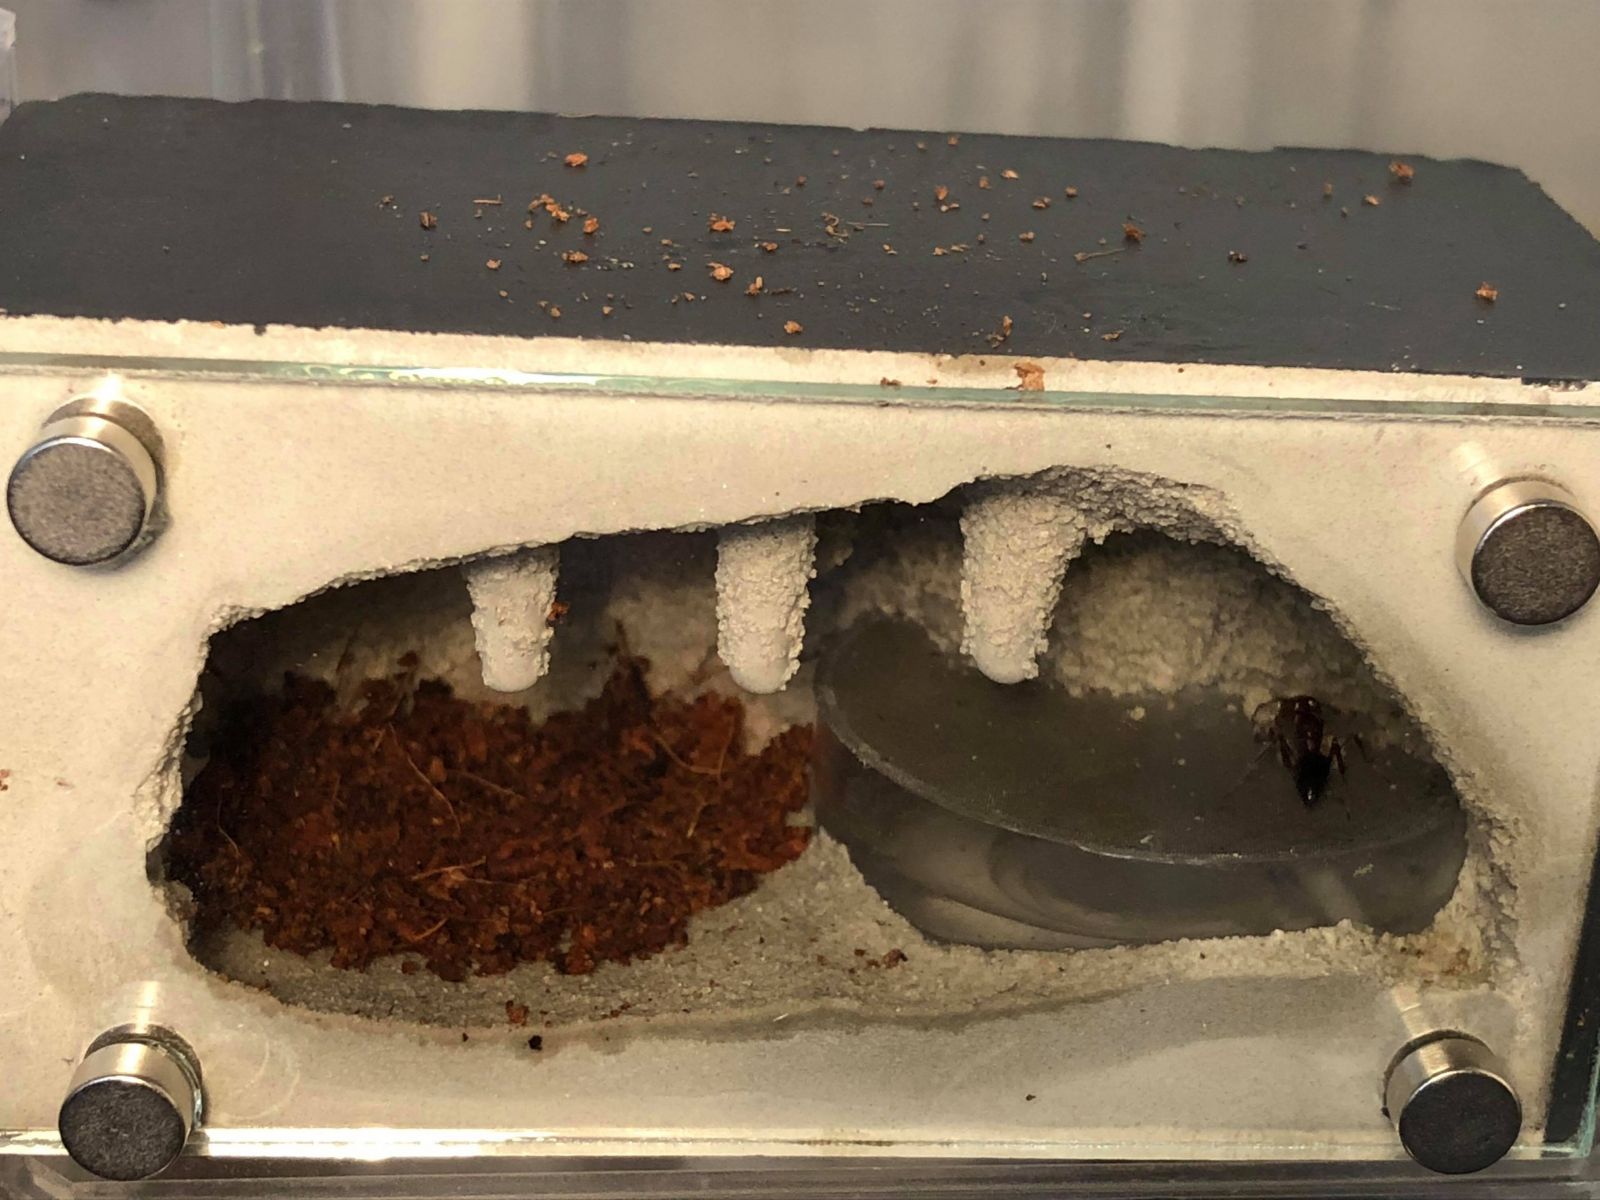 Formicarium with substrate